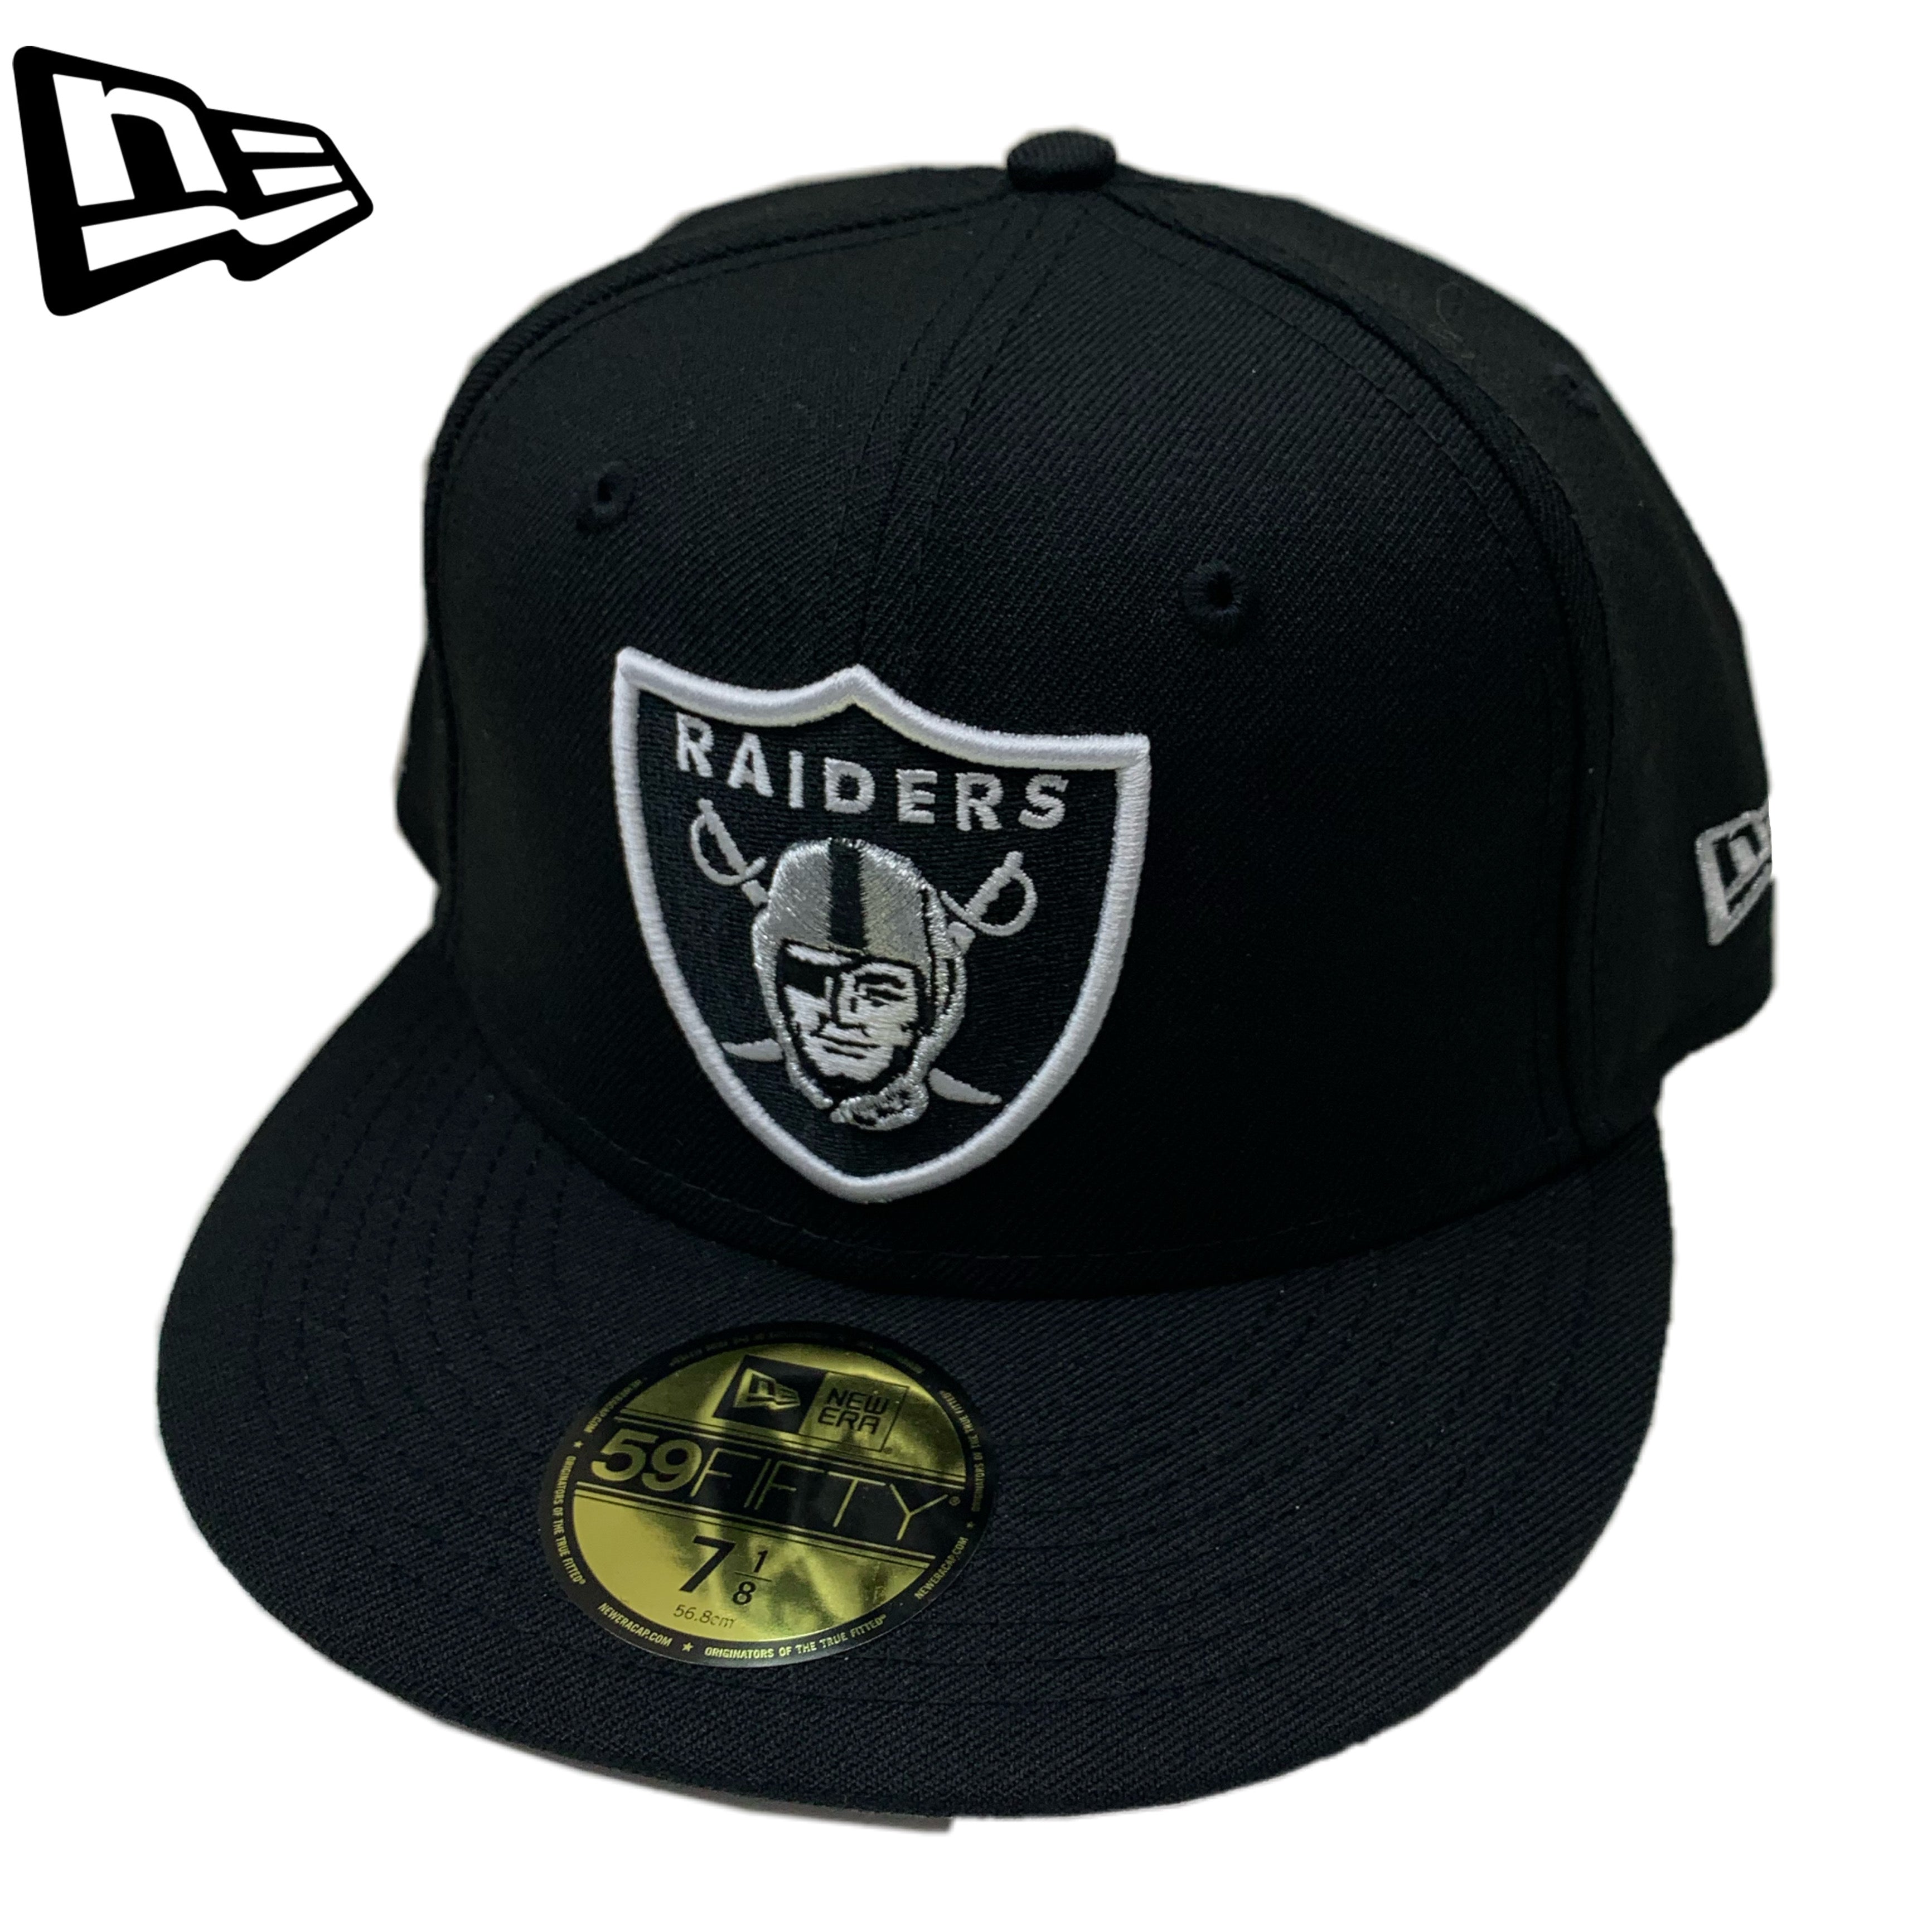 New Era 59FIFTY Las Vegas Raiders Fitted Hat Black White